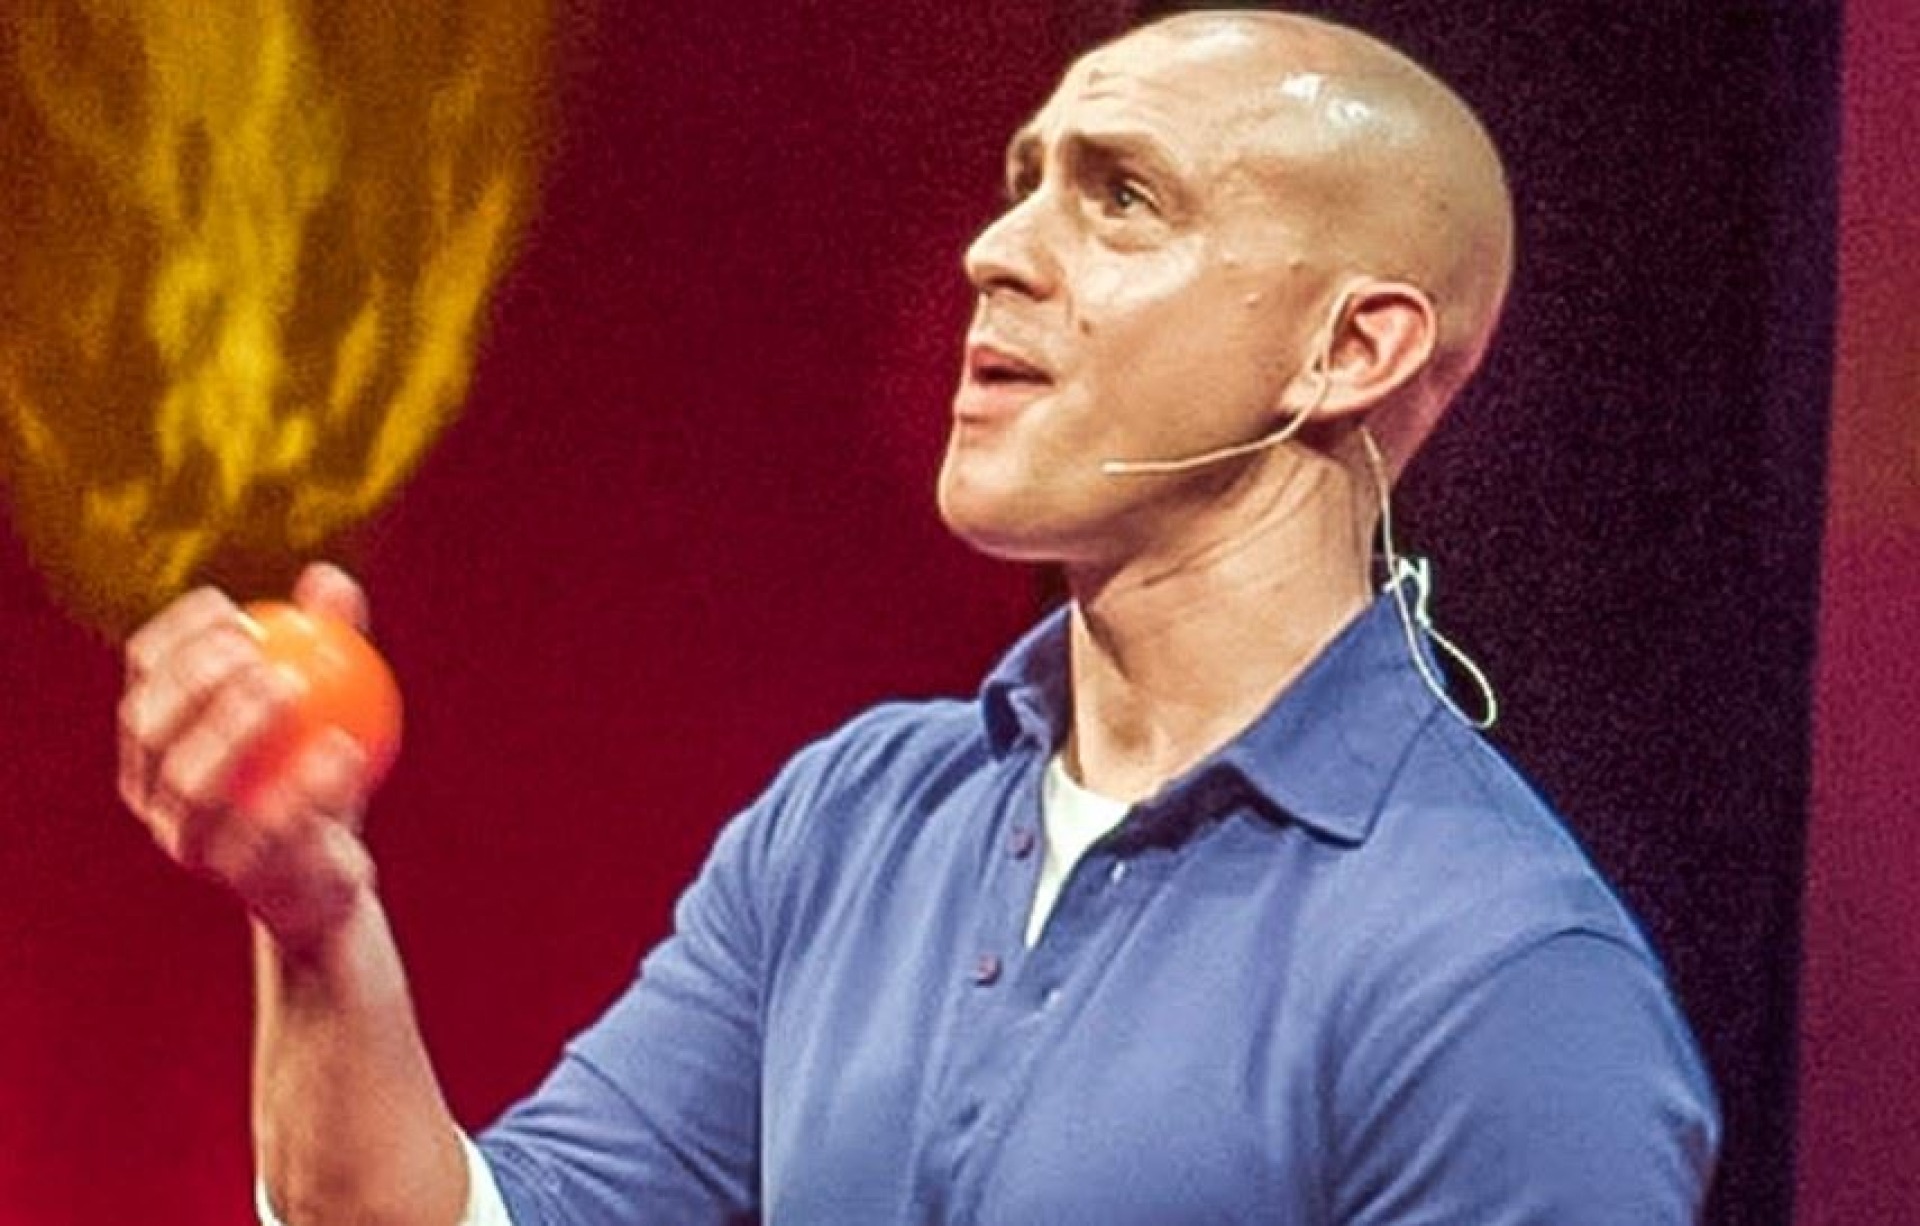 Andy Puddicombe talks about 10 mindful minutes in a TED Talk.